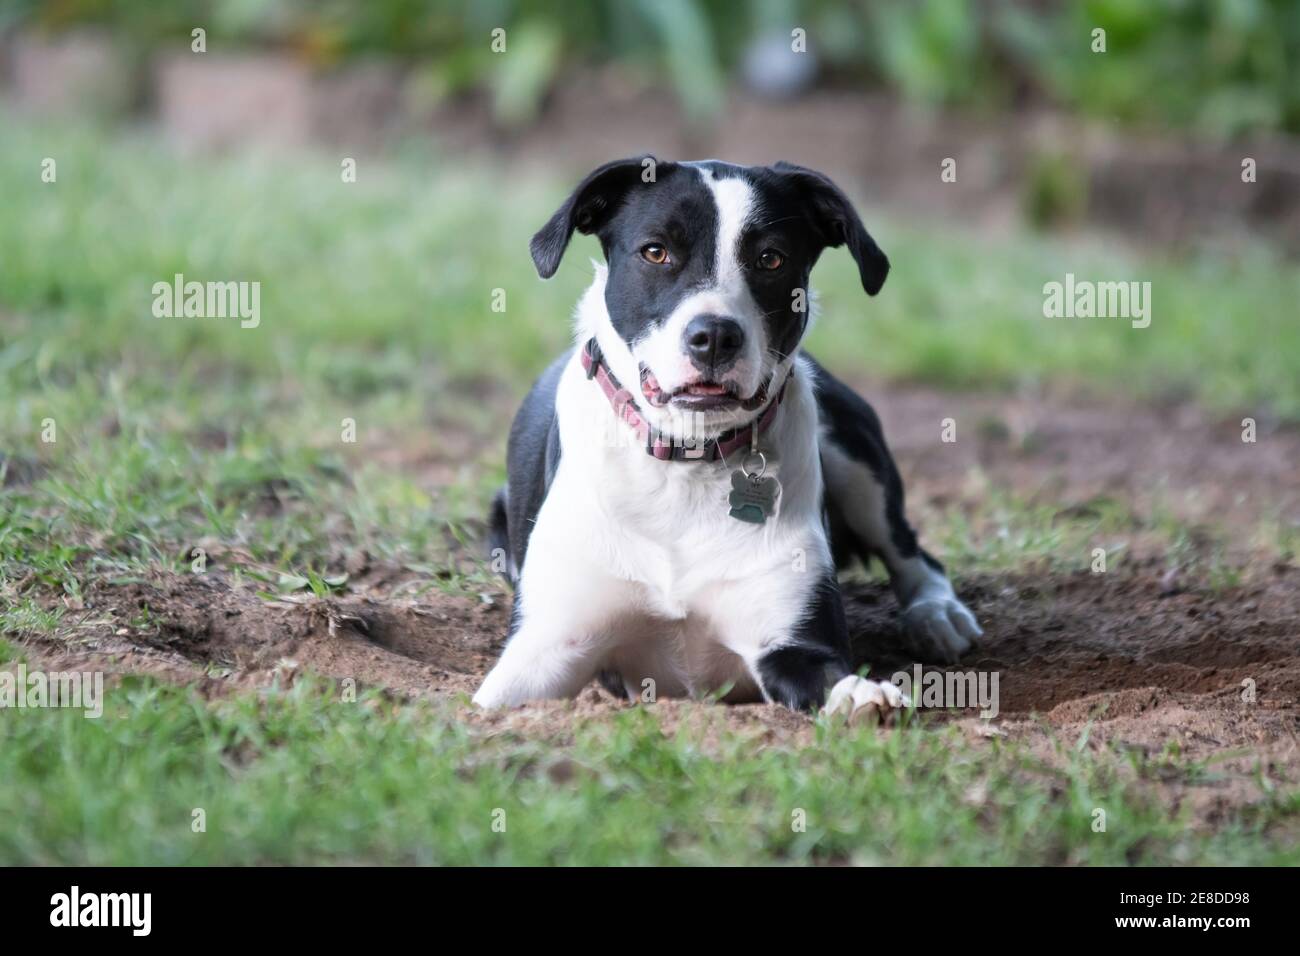 Black and white Border Collie crossbred dog looking at the camera while lying in a hole it has just dug in the yard with blurred background. Stock Photo